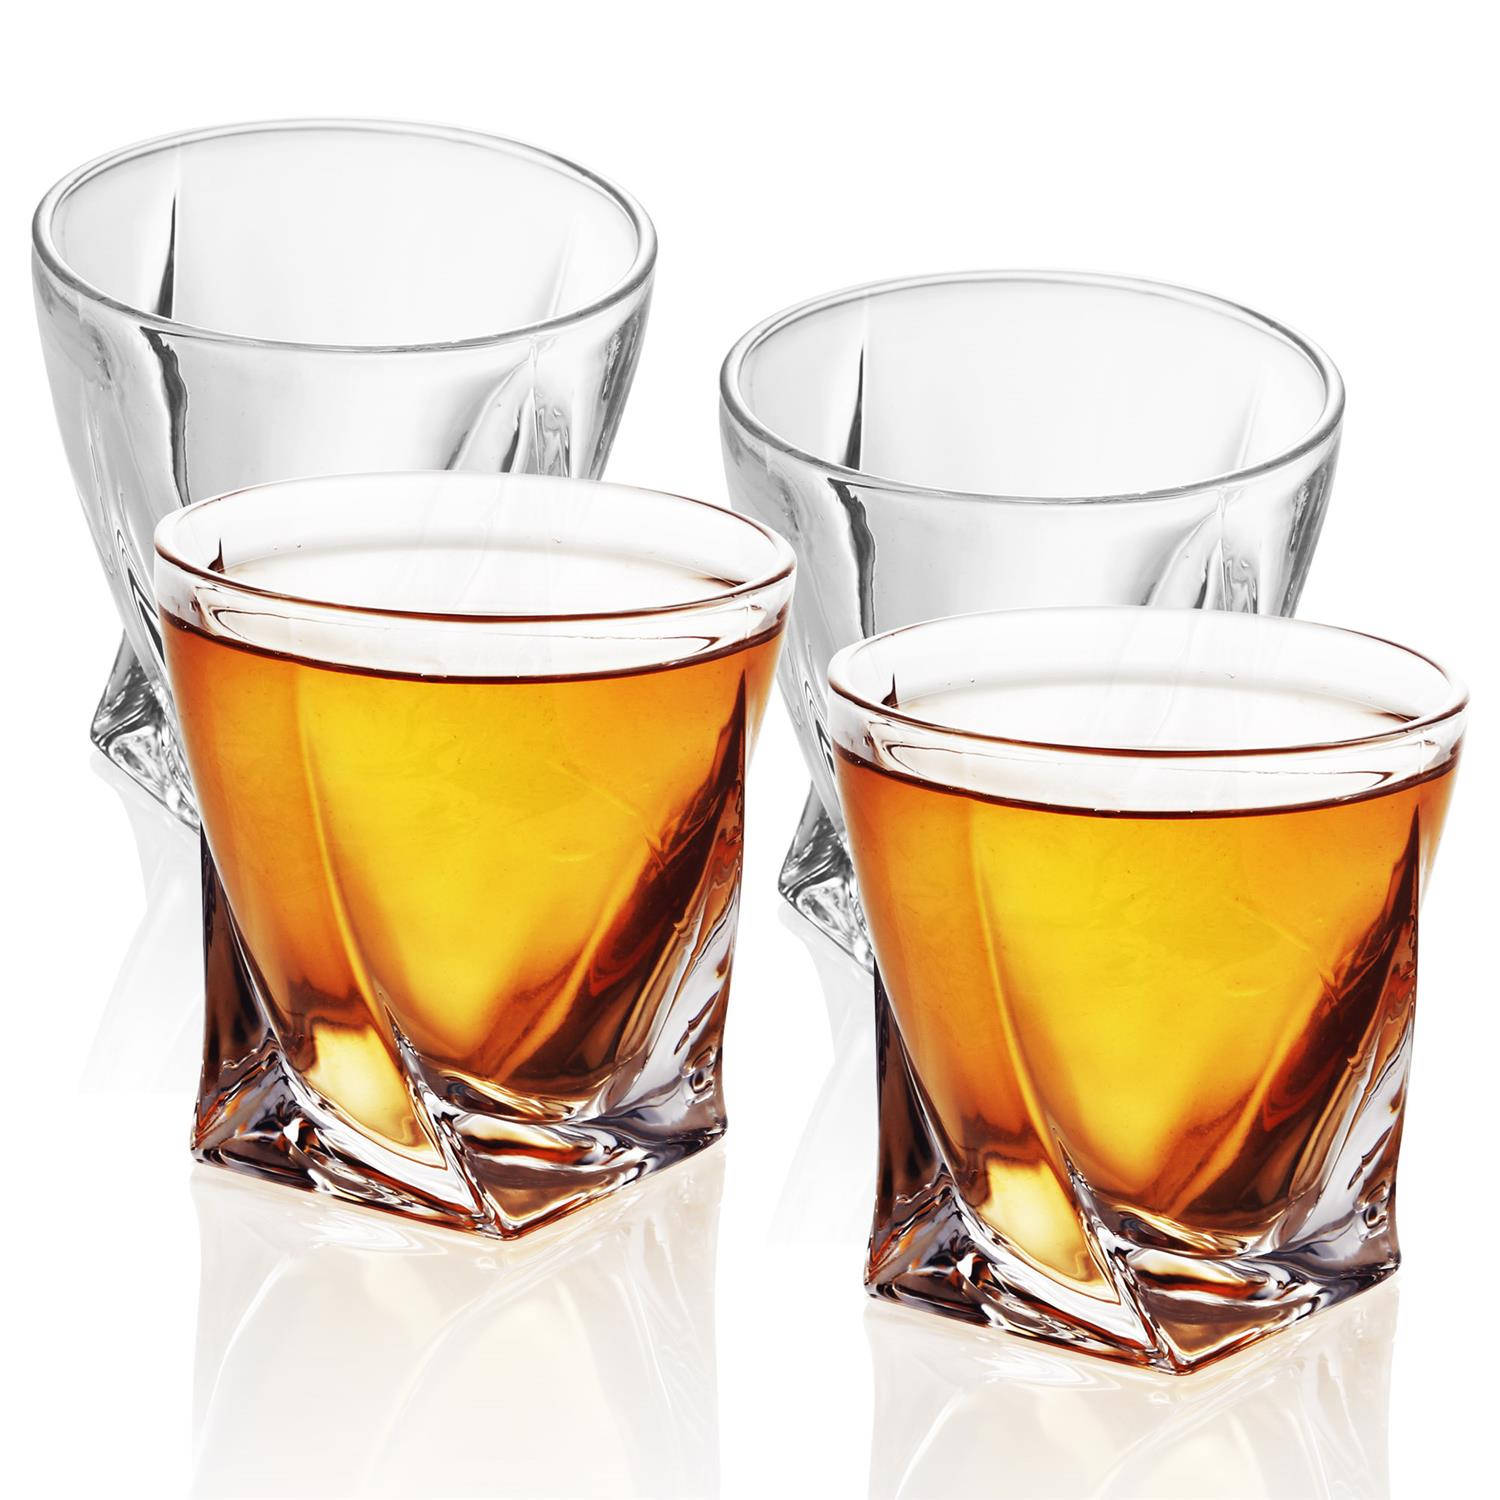 INTIRILIFE 4x Whisky Glass ´TWISTED´ in CRYSTAL CLEAR – Tumbler Ouderwetse Whiskey Crystal Glass Loodvrij in sculptuur Design vaatwasmachinebestendig – Whisky Scotch Bourbon Glaswe